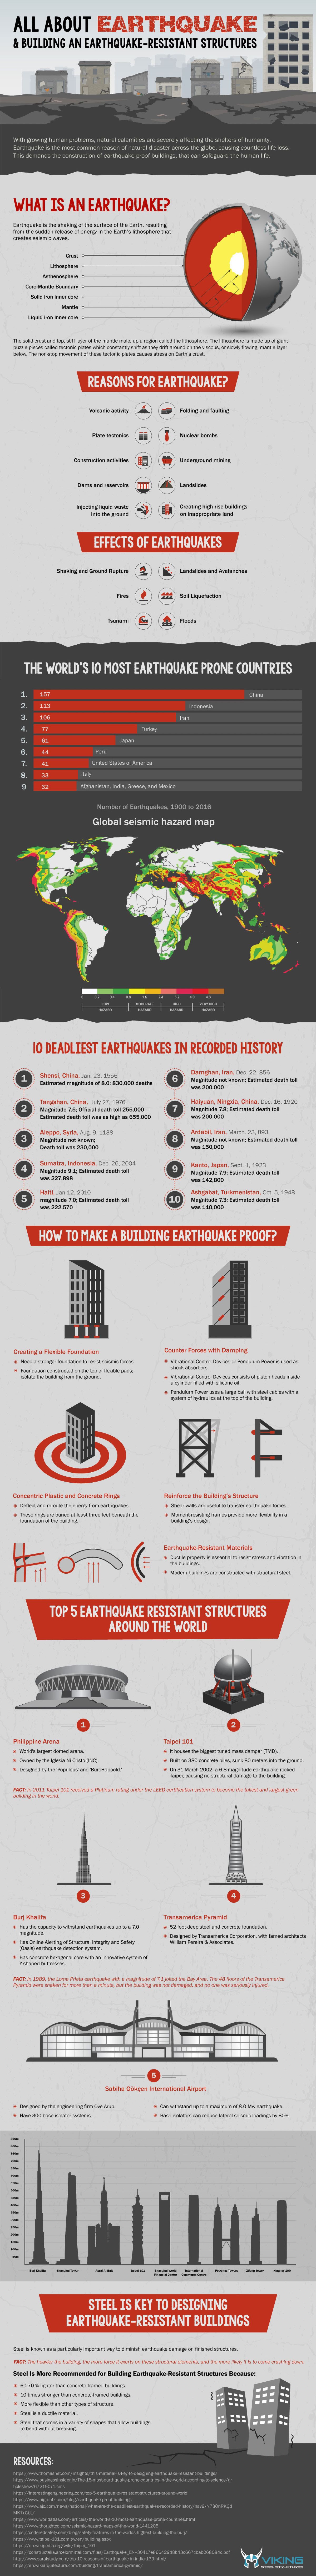 All About Earthquake & Building an Earthquake-Resistant Structures #infographic